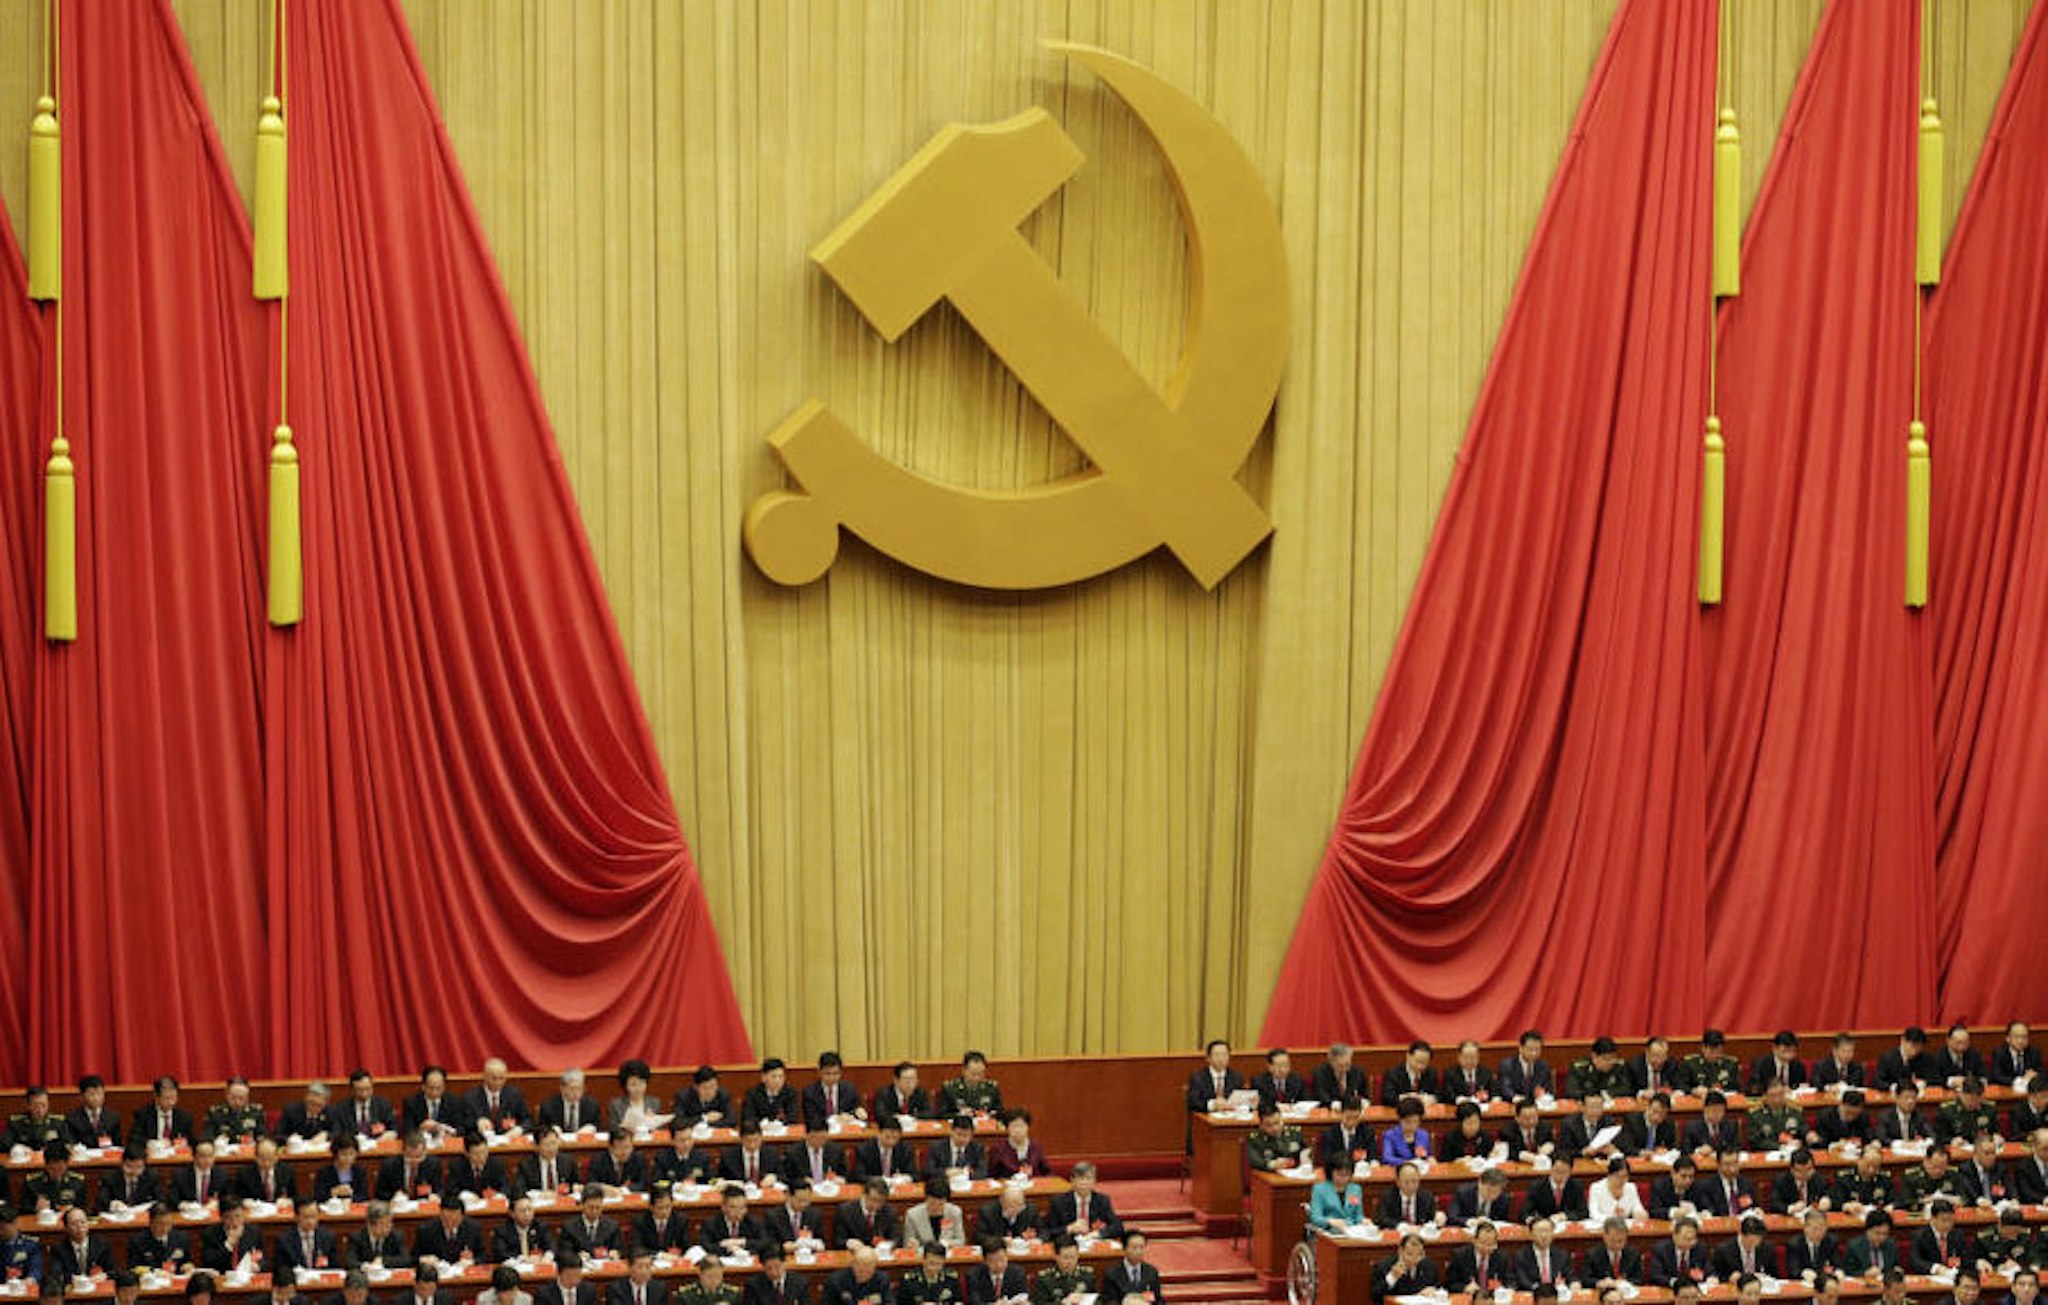 Delegates attend the opening of the 19th National Congress of the Communist Party of China at the Great Hall of the People in Beijing, China, on Wednesday, Oct. 18, 2017. Xi warned of “severe” challenges, as he kicked off a twice-a-decade party meeting that may signal if he will appoint a successor to rule after 2022.